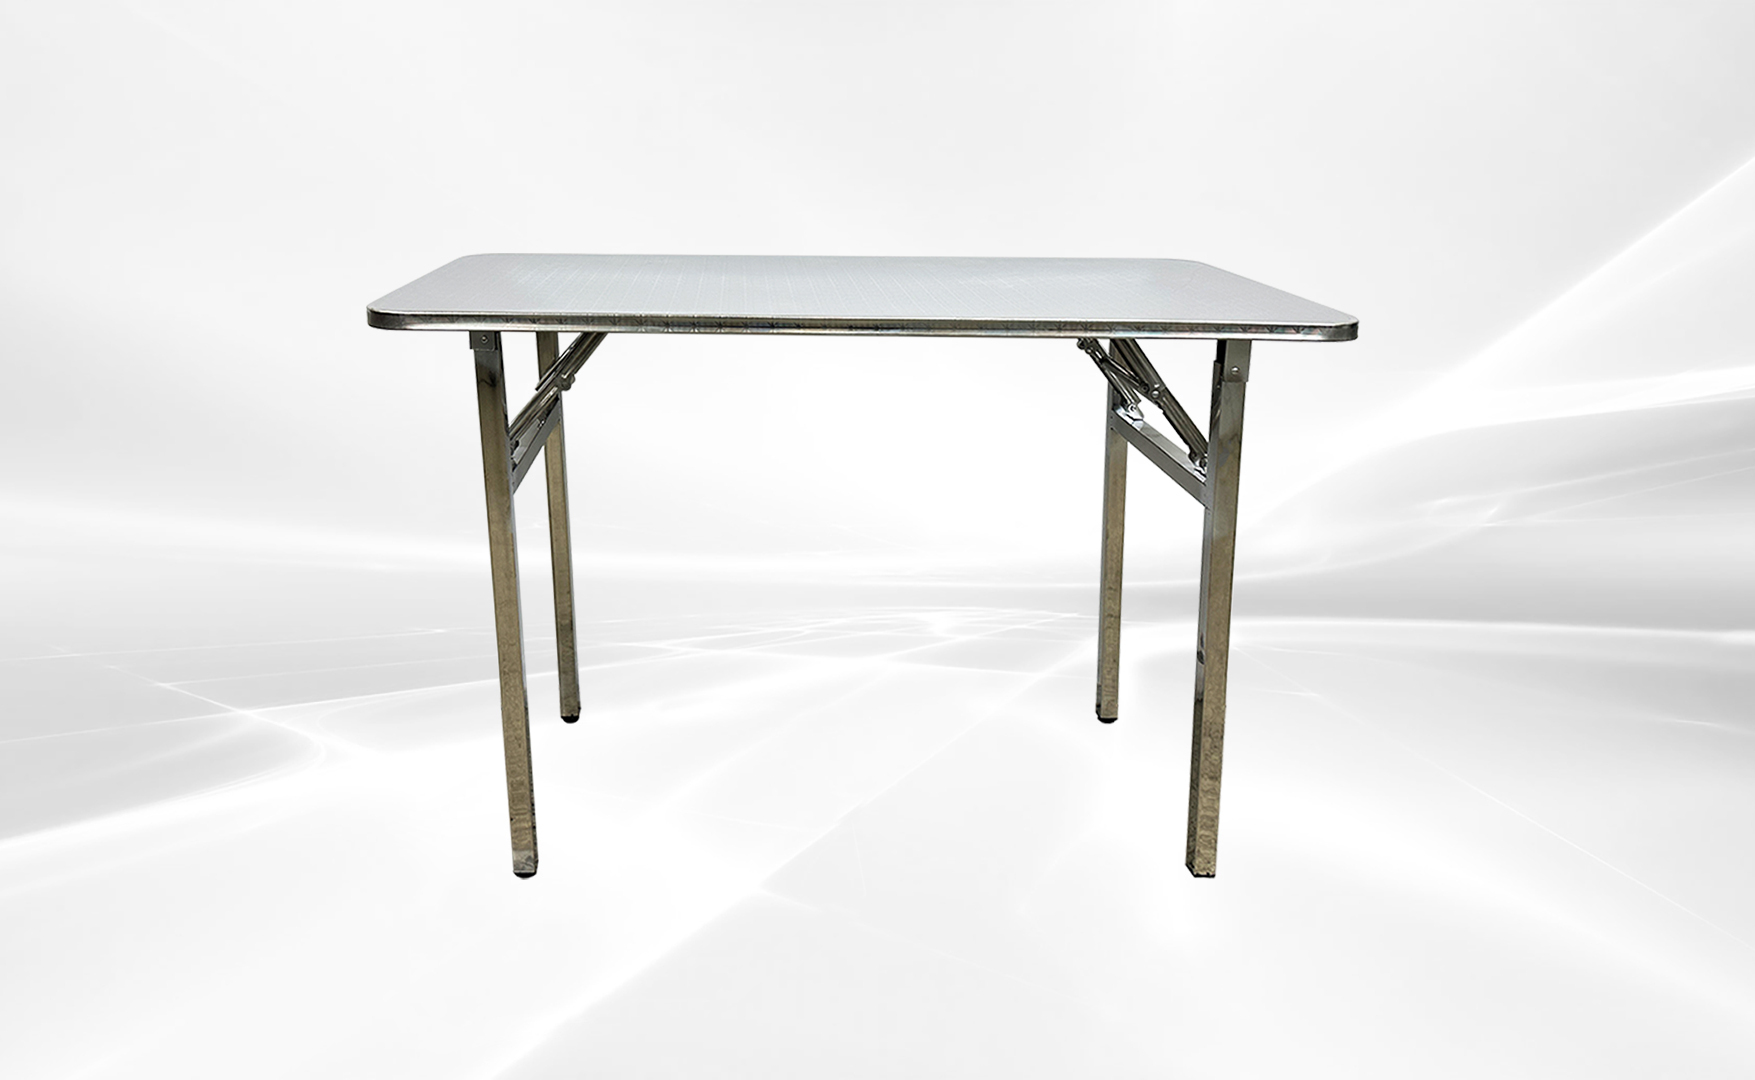 24*48 inches restaurant Folding Stainless steel Table SFT-2448